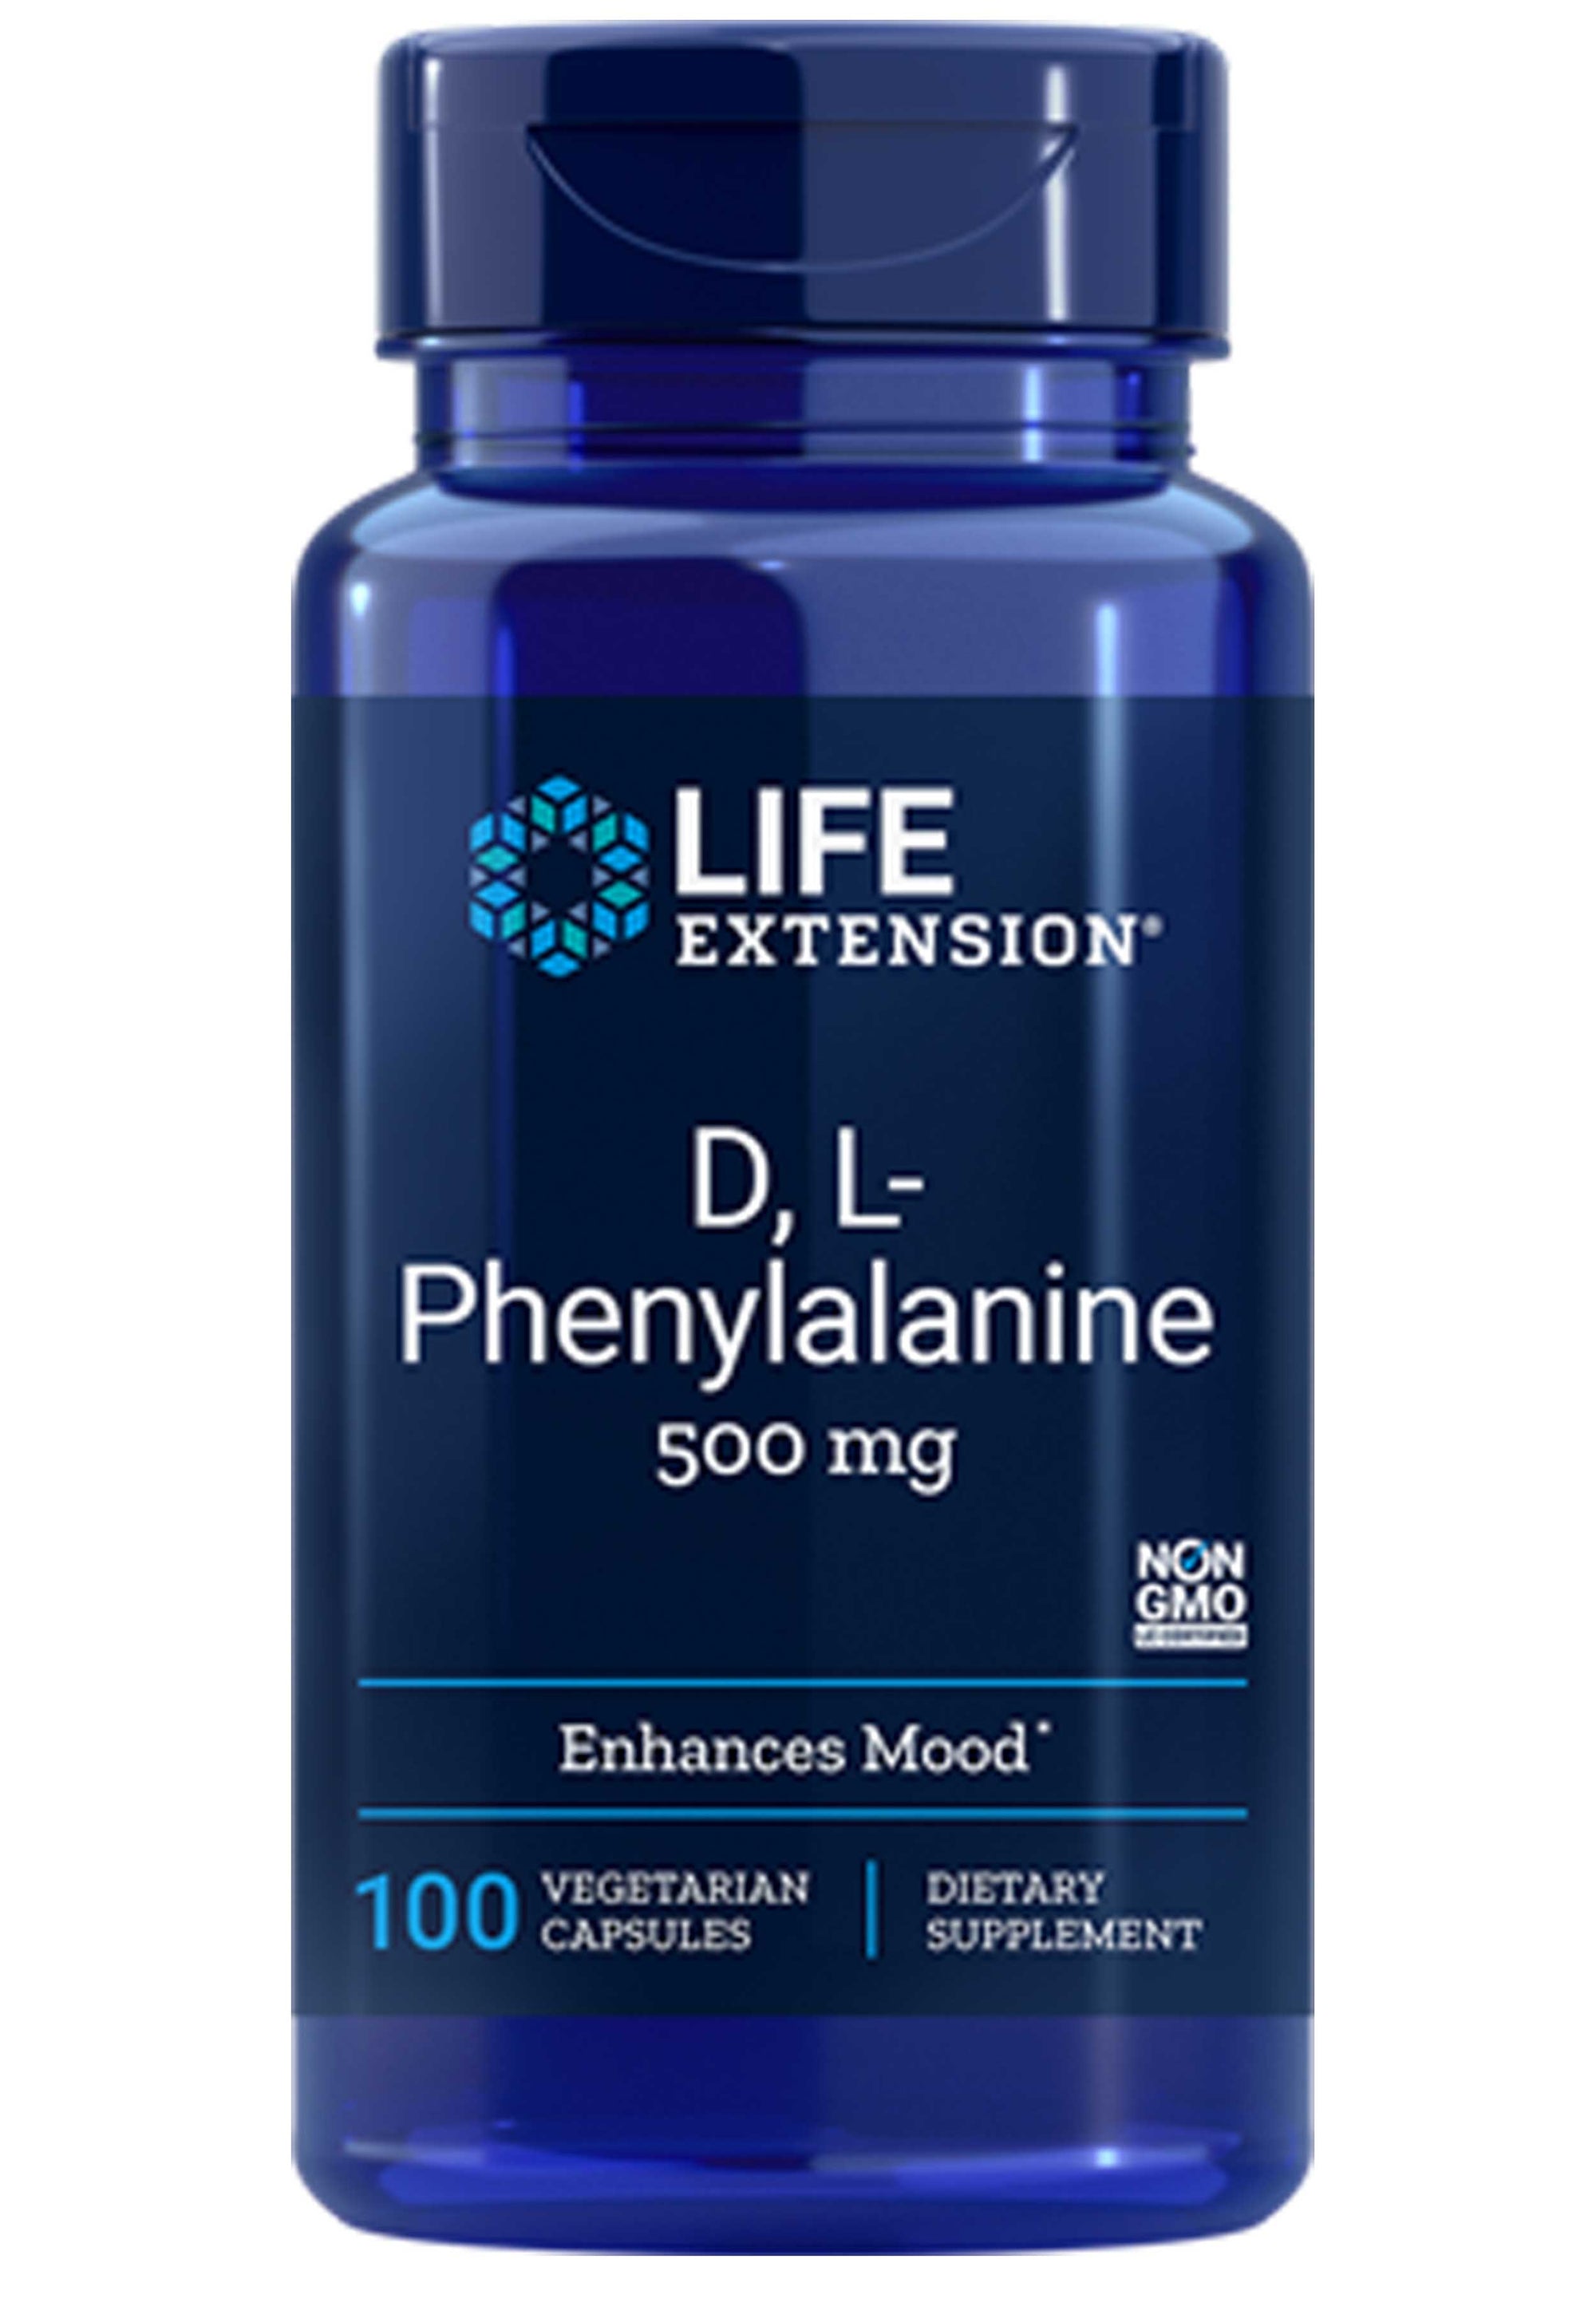 Life Extension D L Phenylalanine Capsules – Supplement First